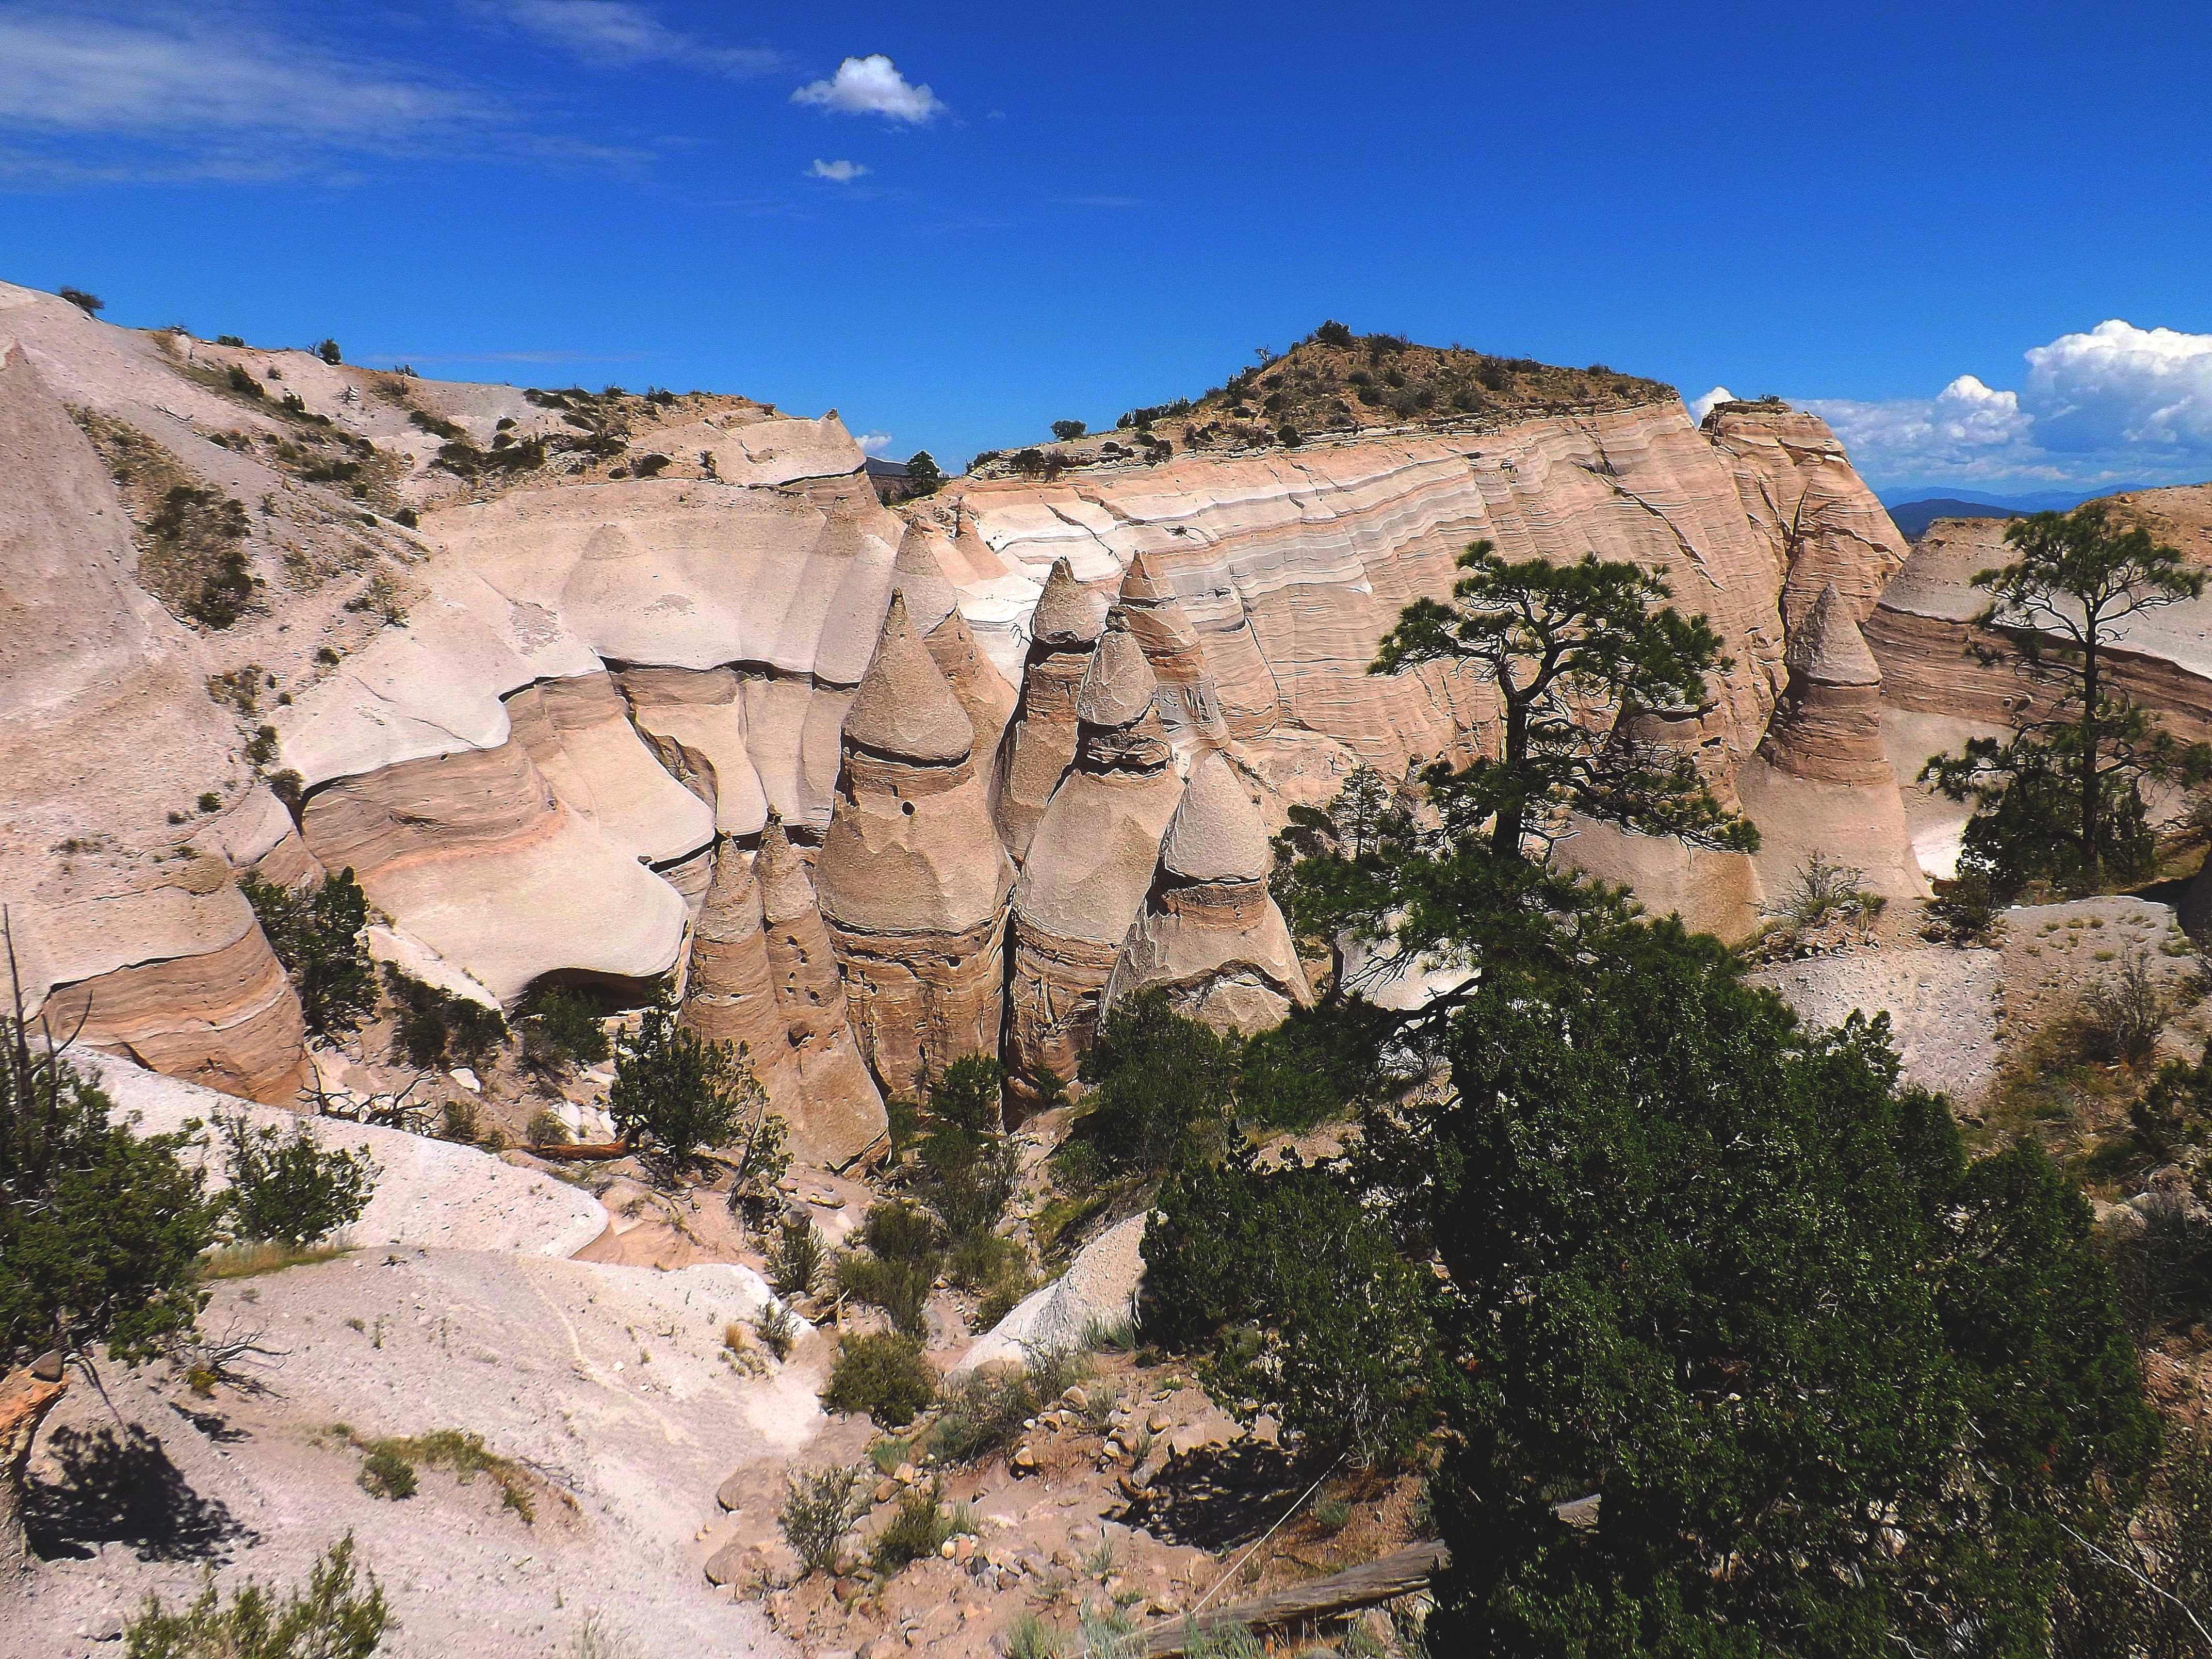 Photo: Tent Rocks in the Pueblo of Cochiti in Rio Grande, New Mexico, This file is licensed under the Creative Commons Attribution-Share Alike 4.0 International license.